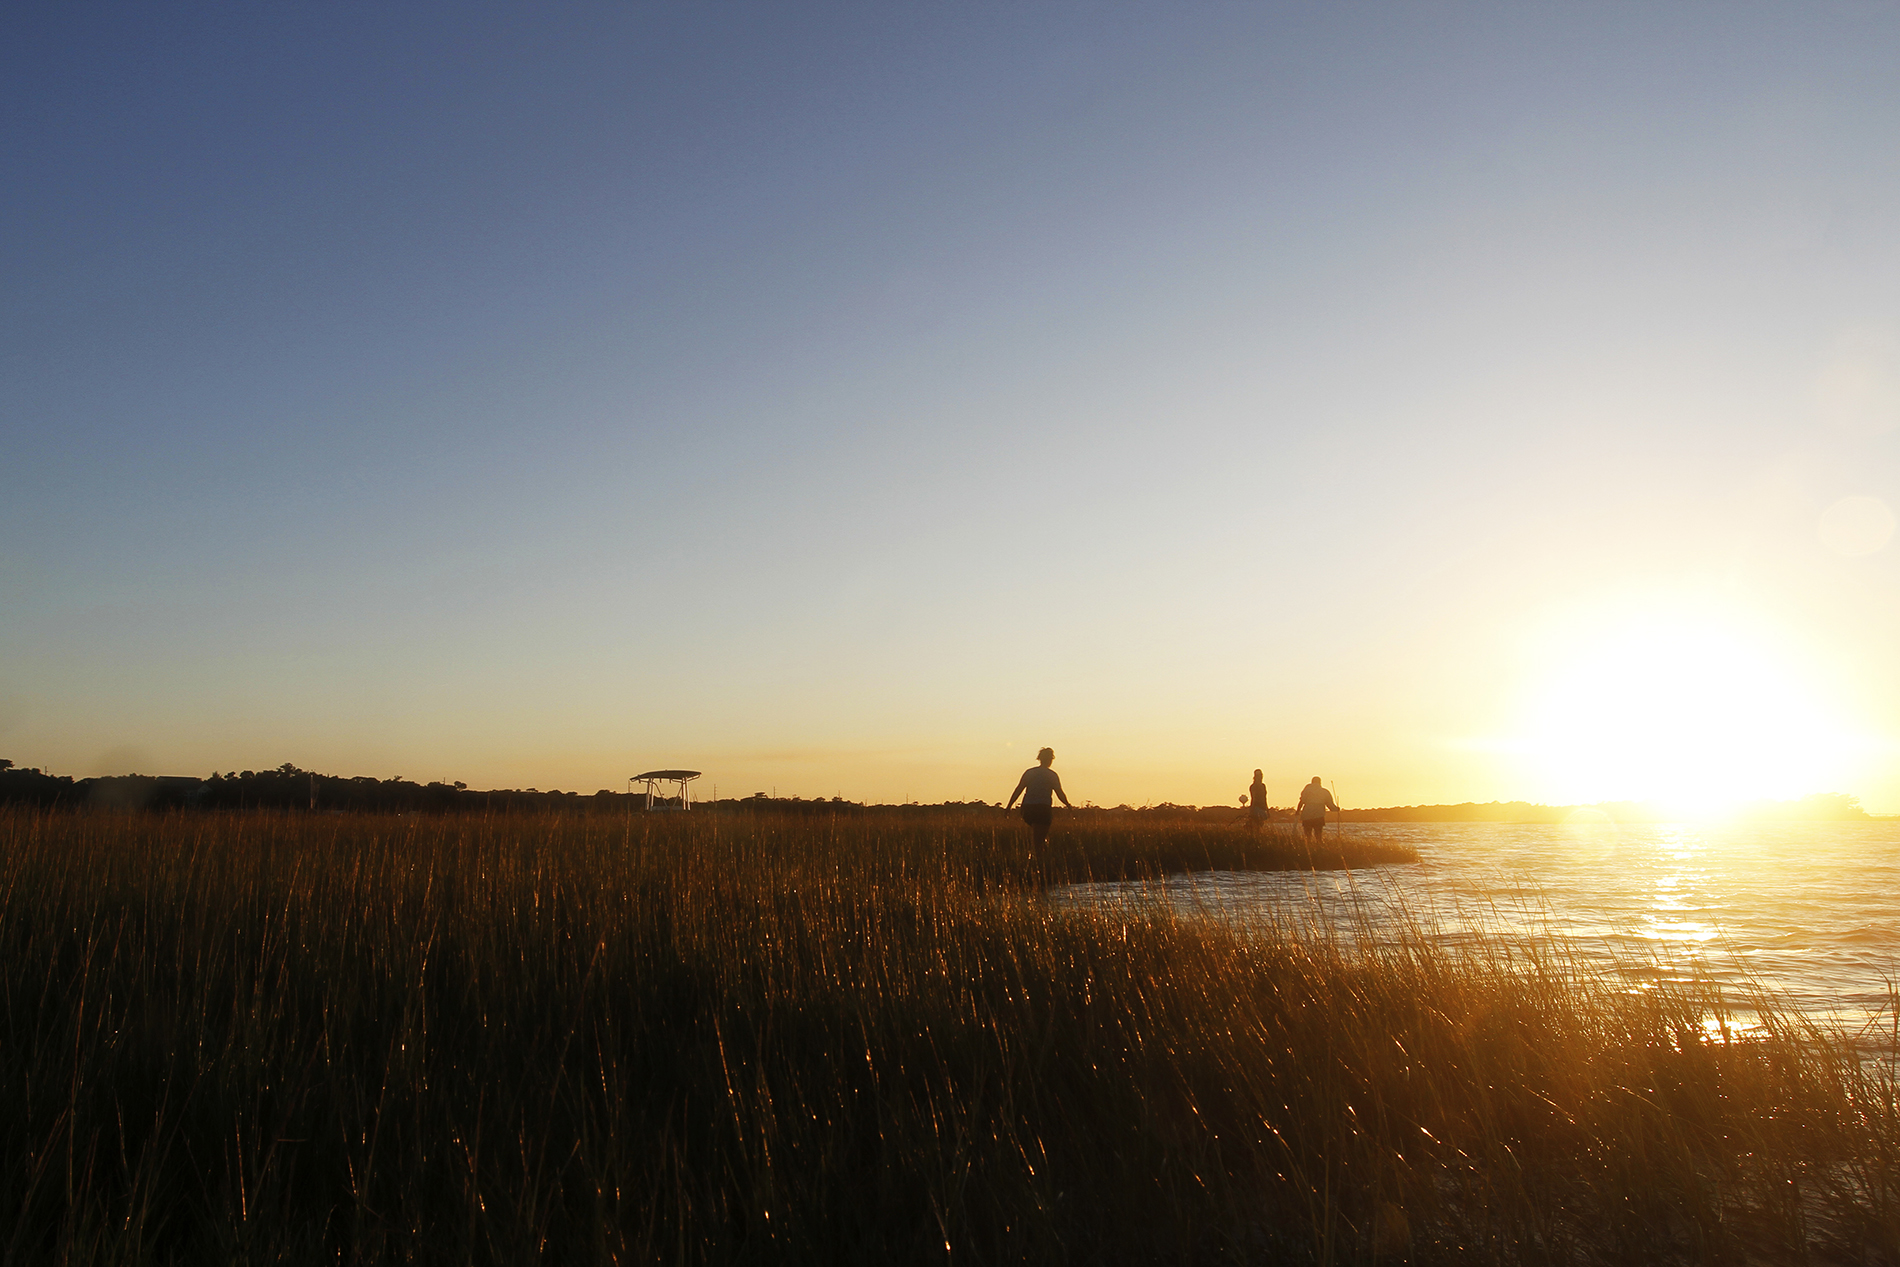 The sun sets as Ziegler and her team head to their next site. You can see their tiny figures off in the distance as the sun sets on the marsh in the foreground.